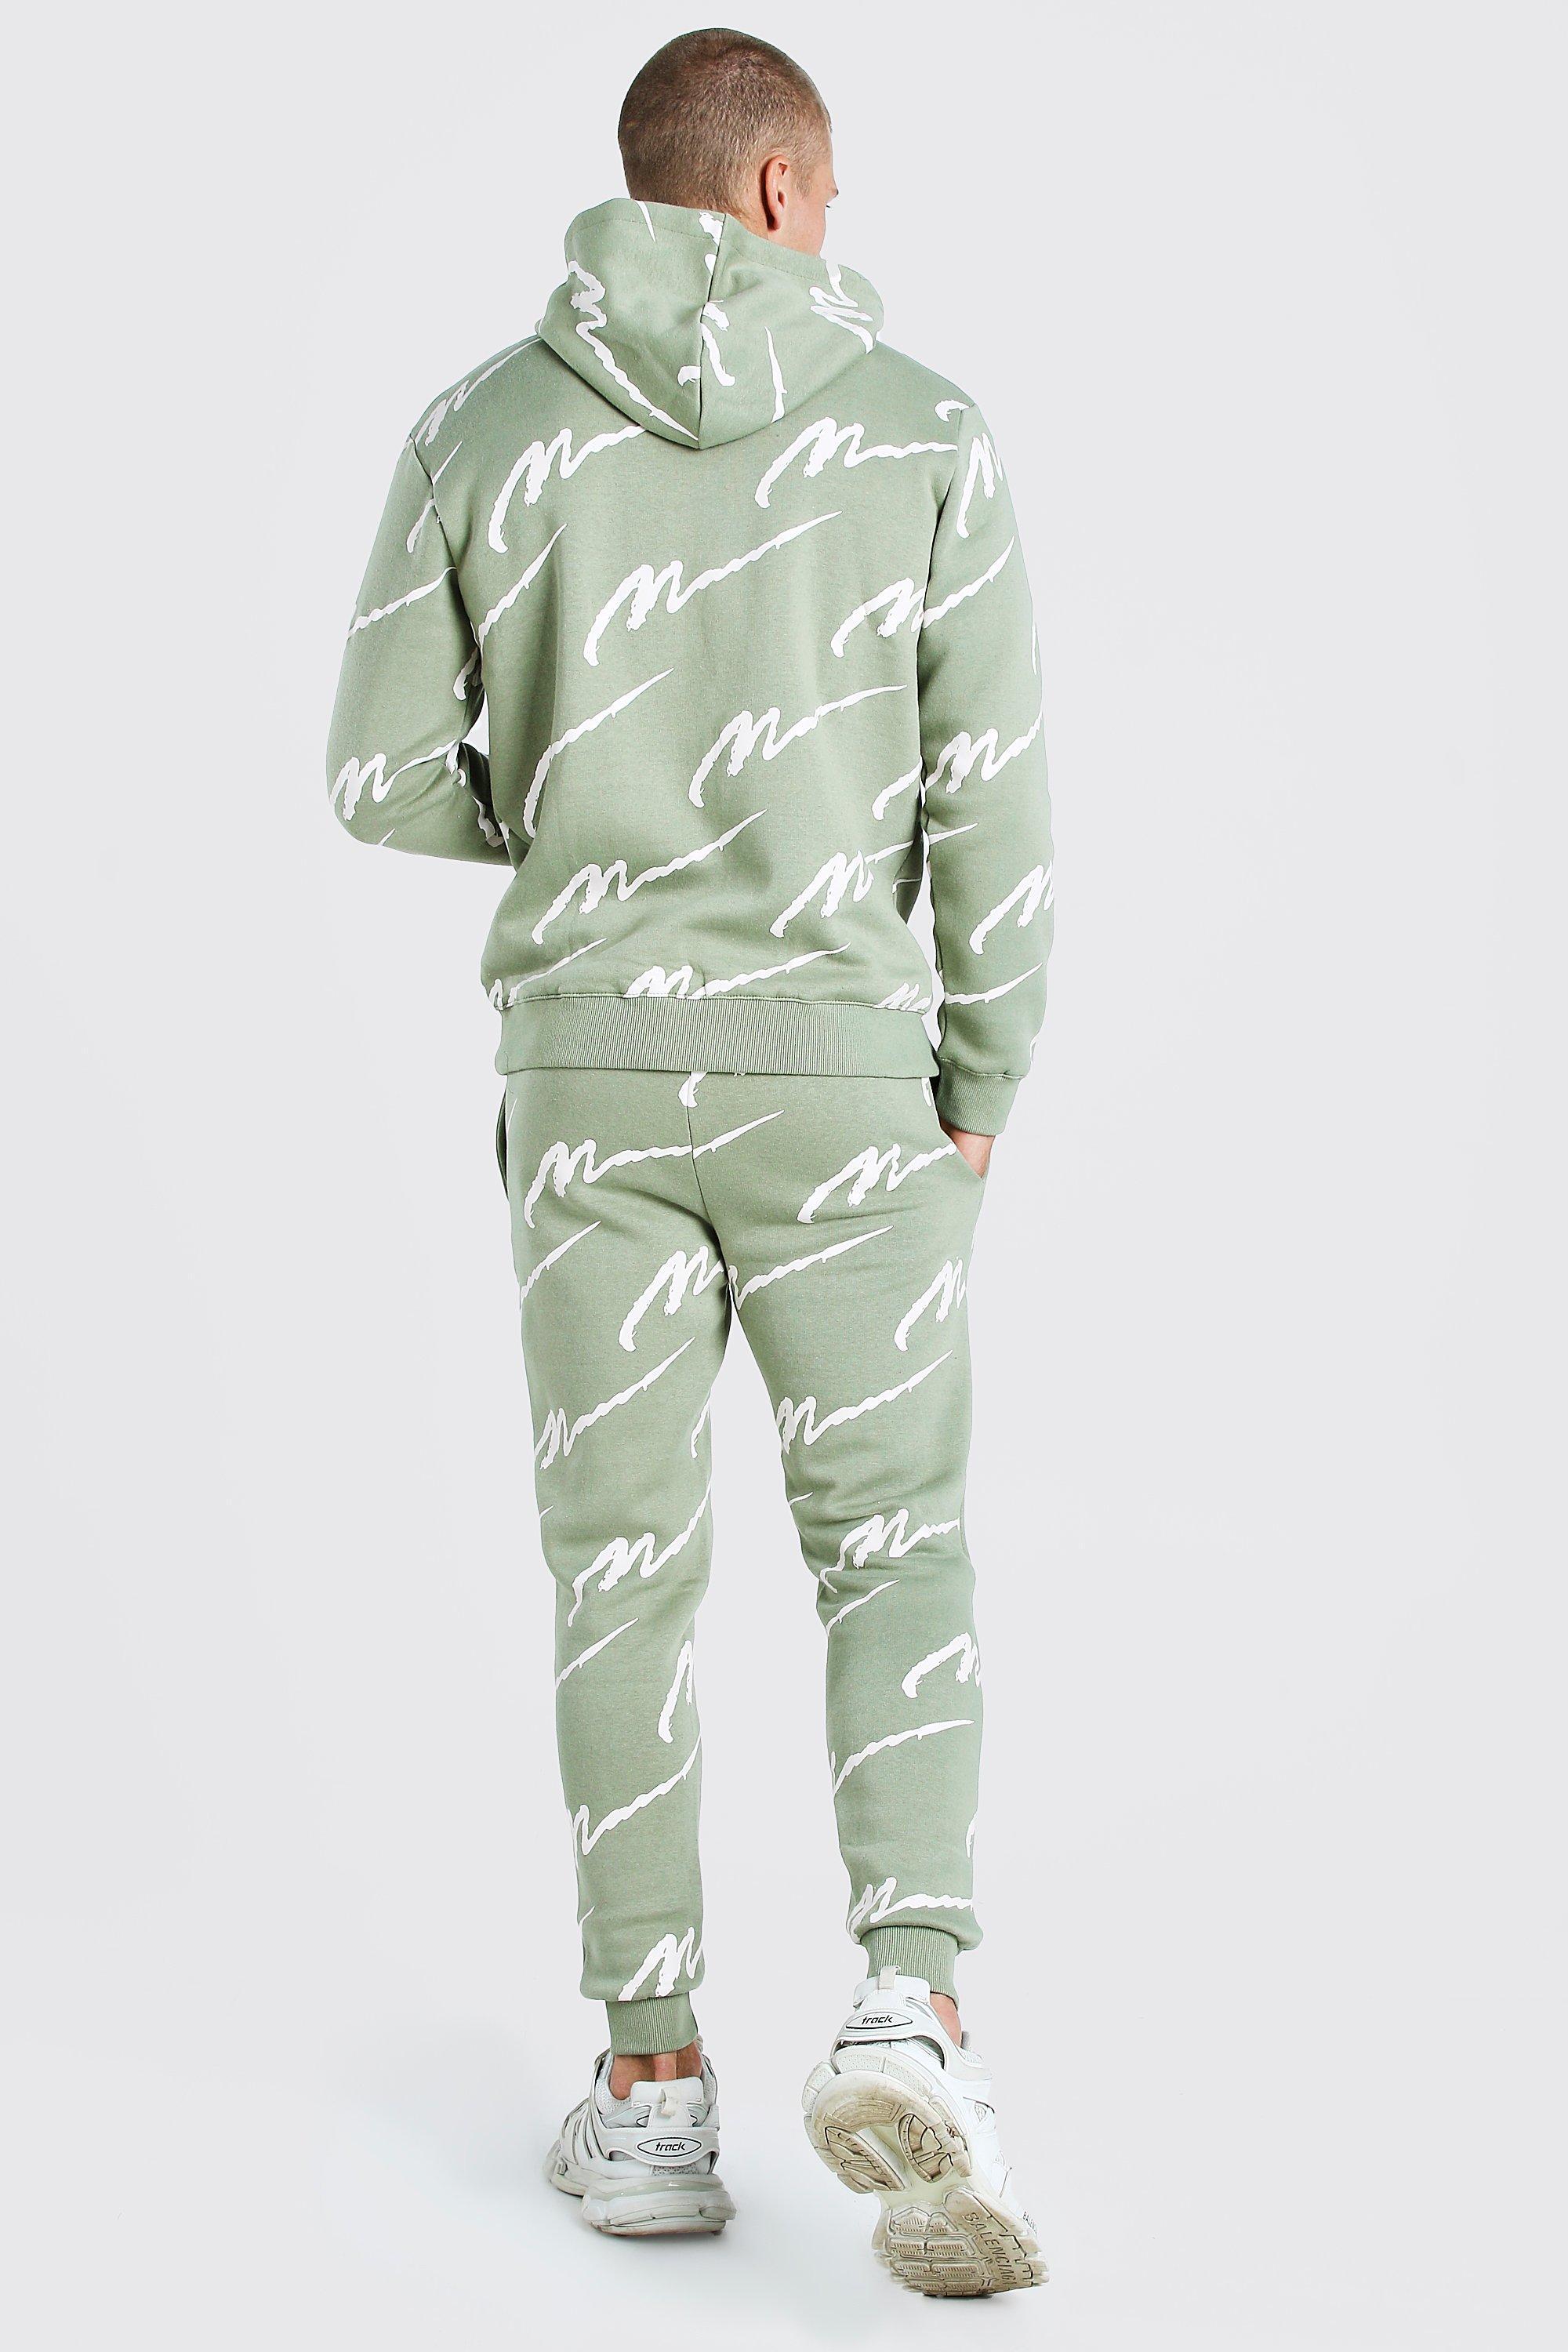 BoohooMAN All Over Man Printed Hooded Tracksuit in Green for Men - Lyst